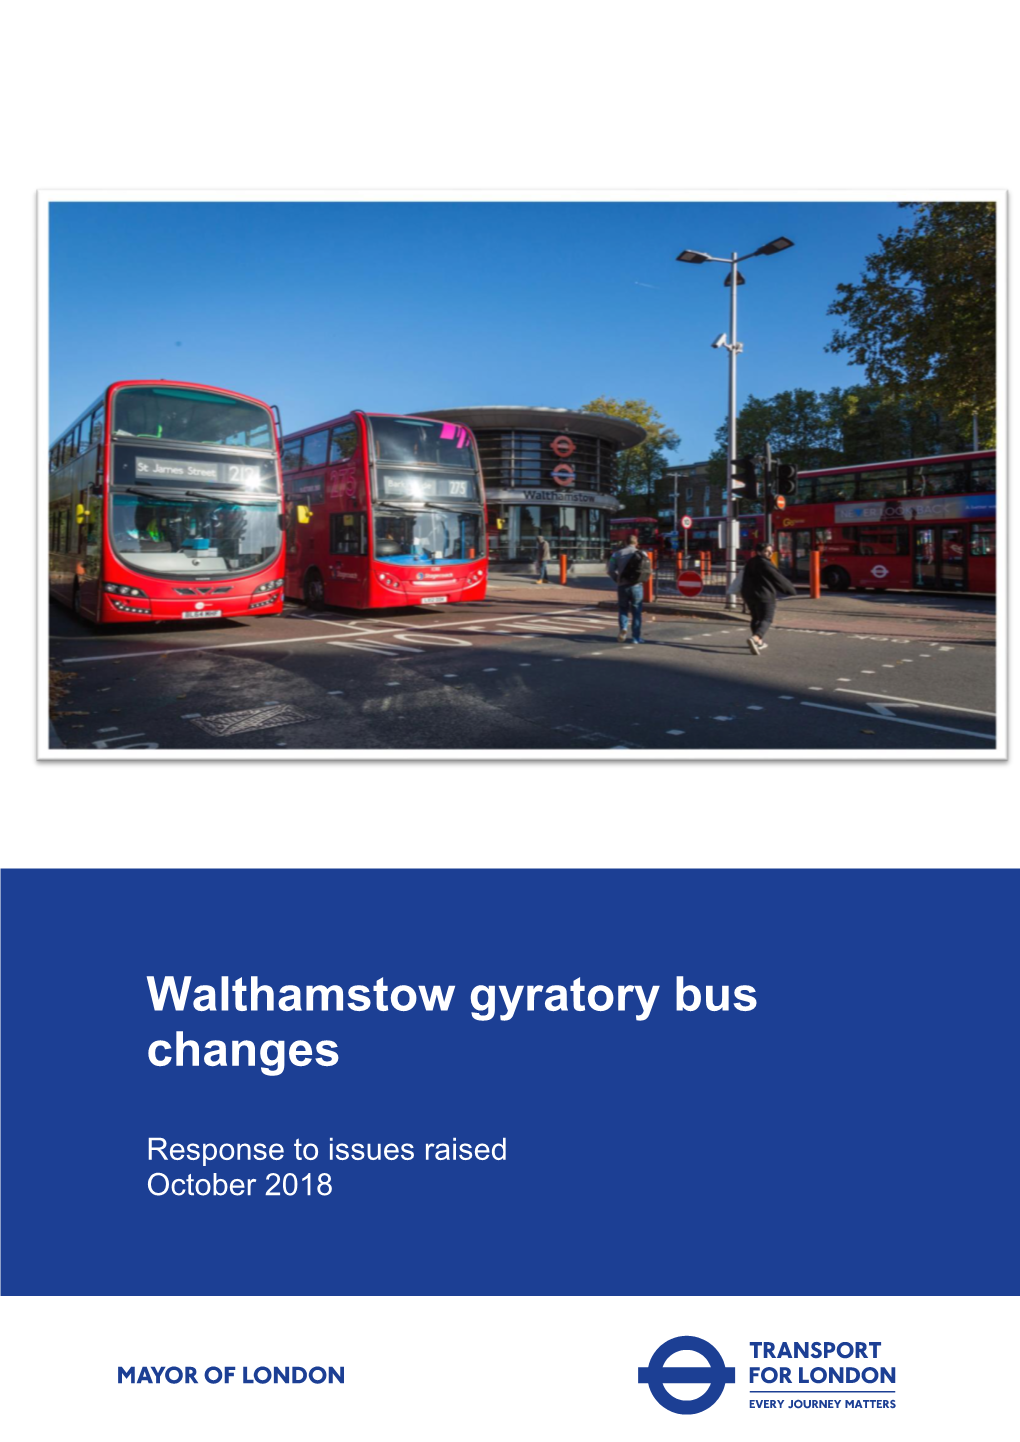 Walthamstow Gyratory Bus Changes Response to Issues Raised